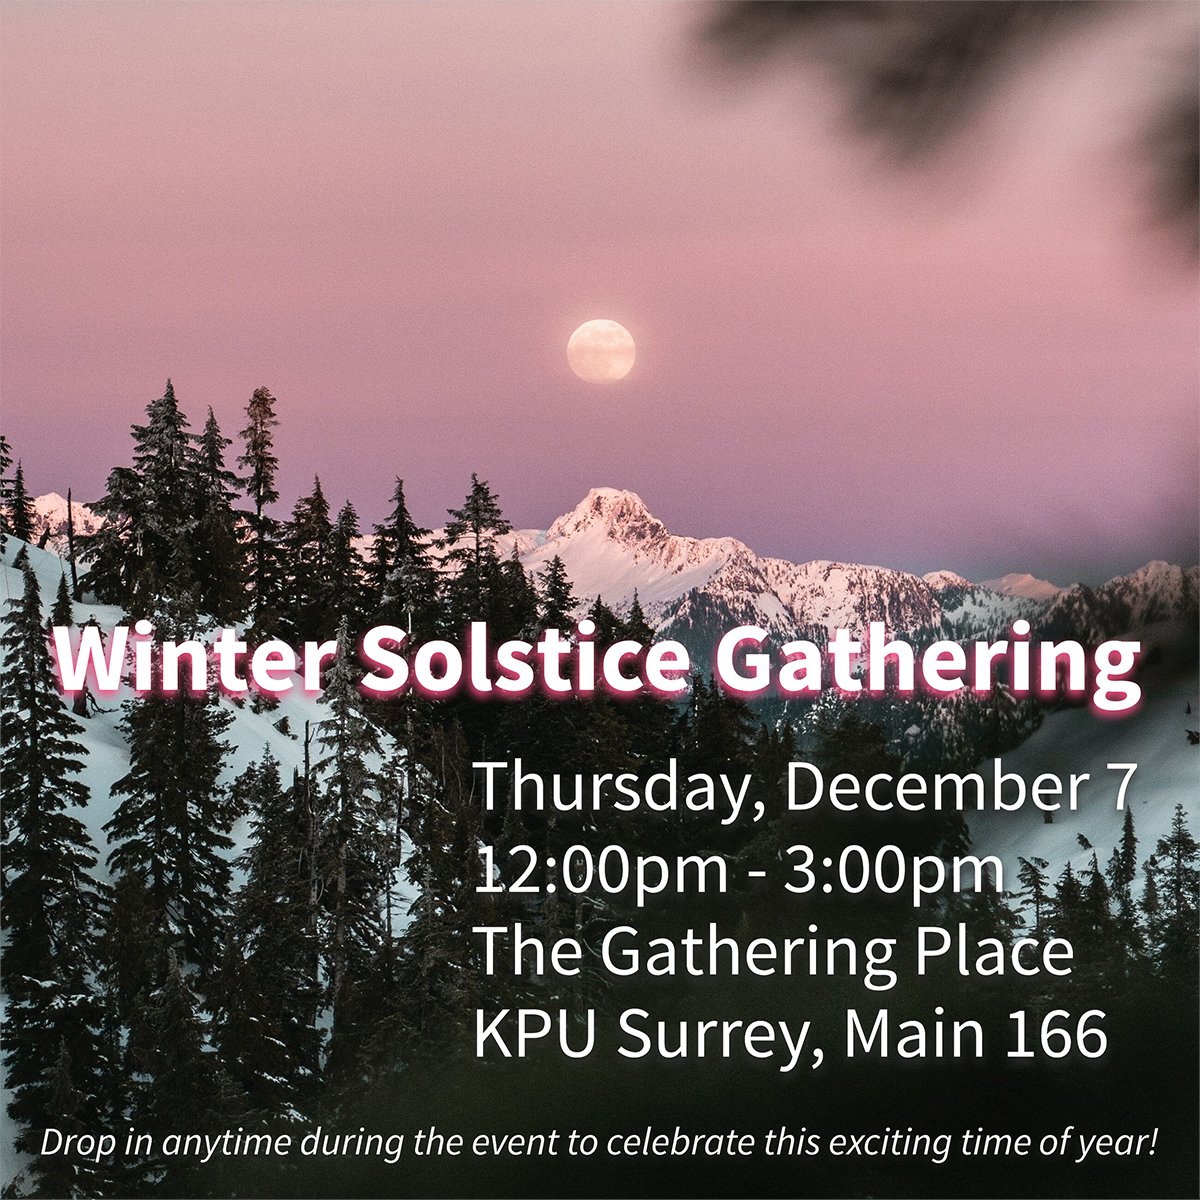 The #WinterSolstice is celebrated when the sun begins its return journey North, indicating the days will start to become longer. Join us in gathering together, sharing stories, and connecting over food as we celebrate this natural wonder and welcome the beautiful winter season.